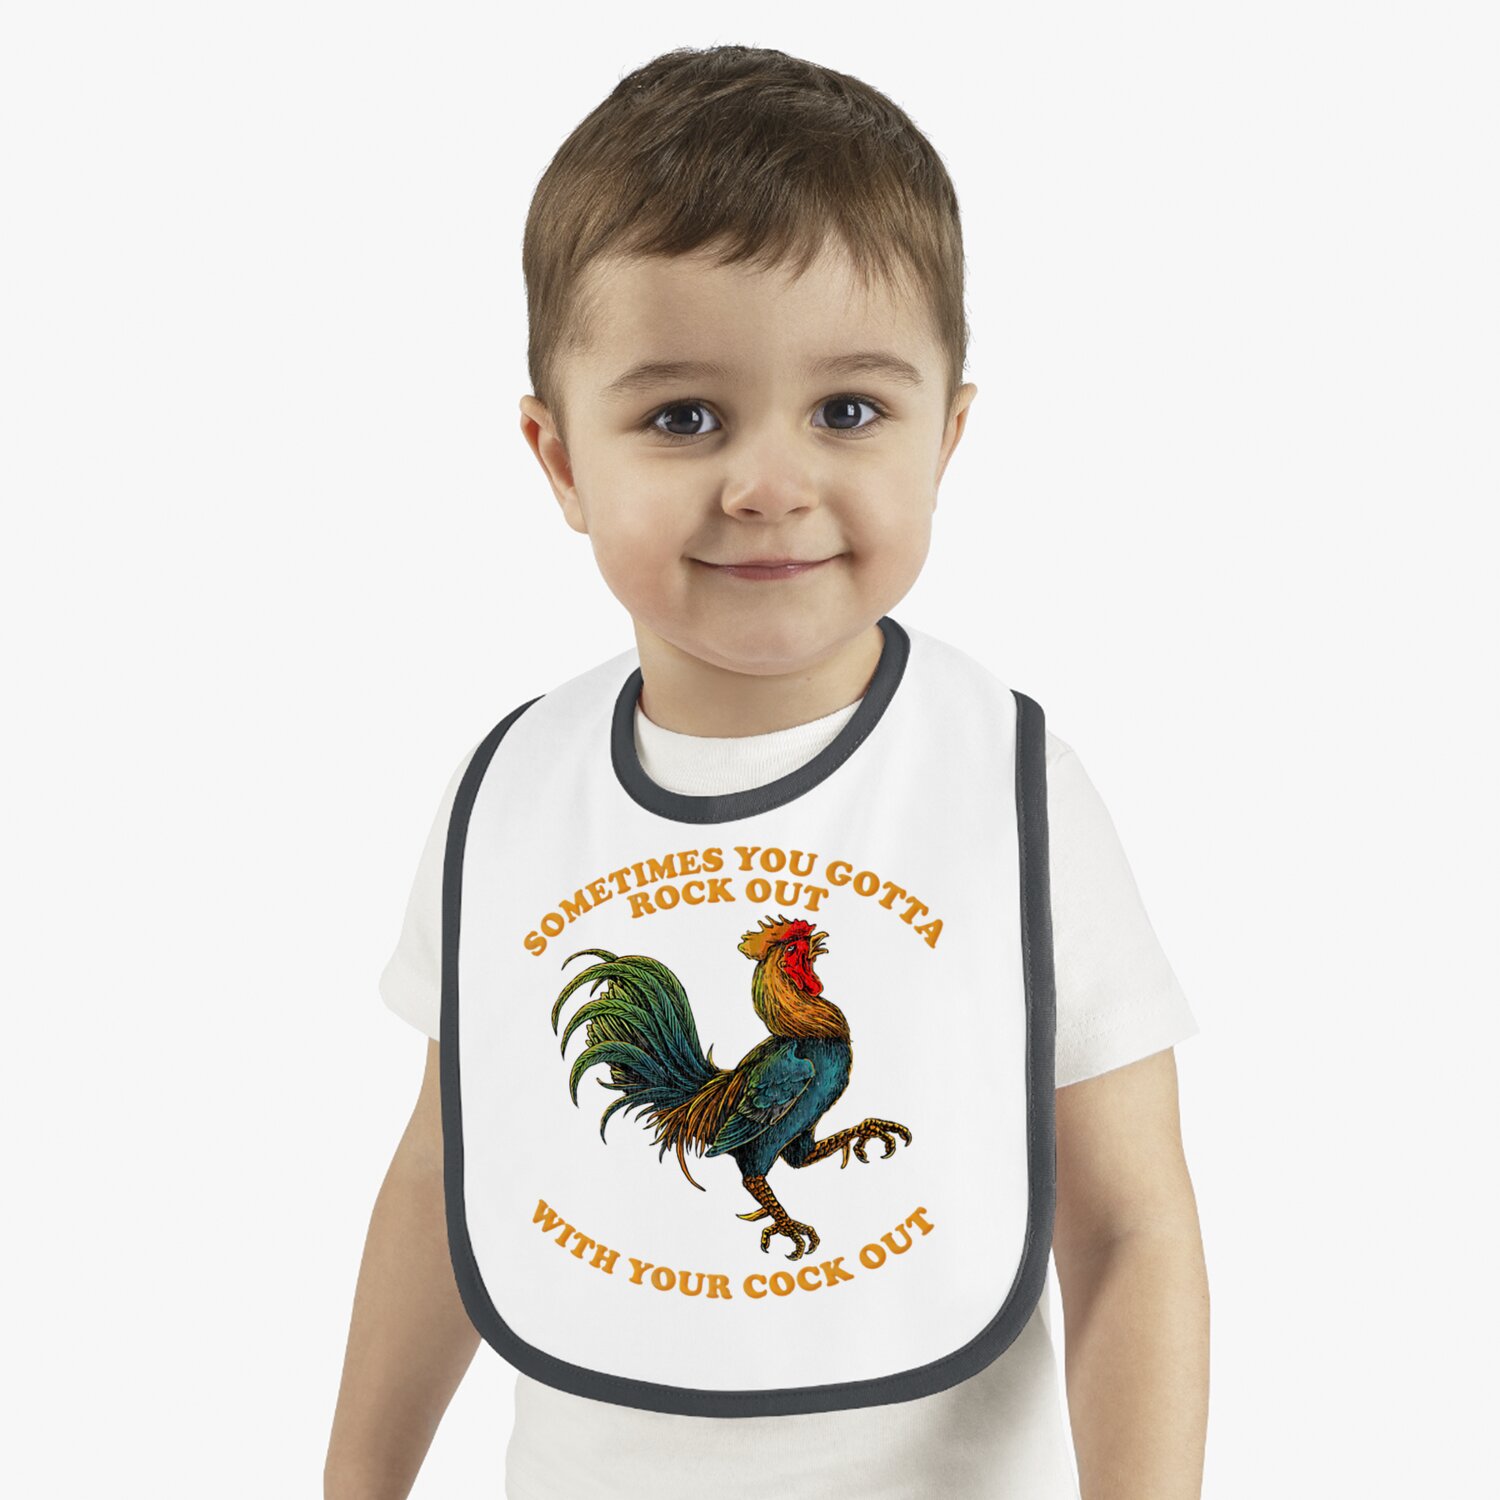 Rock Out With Your Cock Out  Bibs